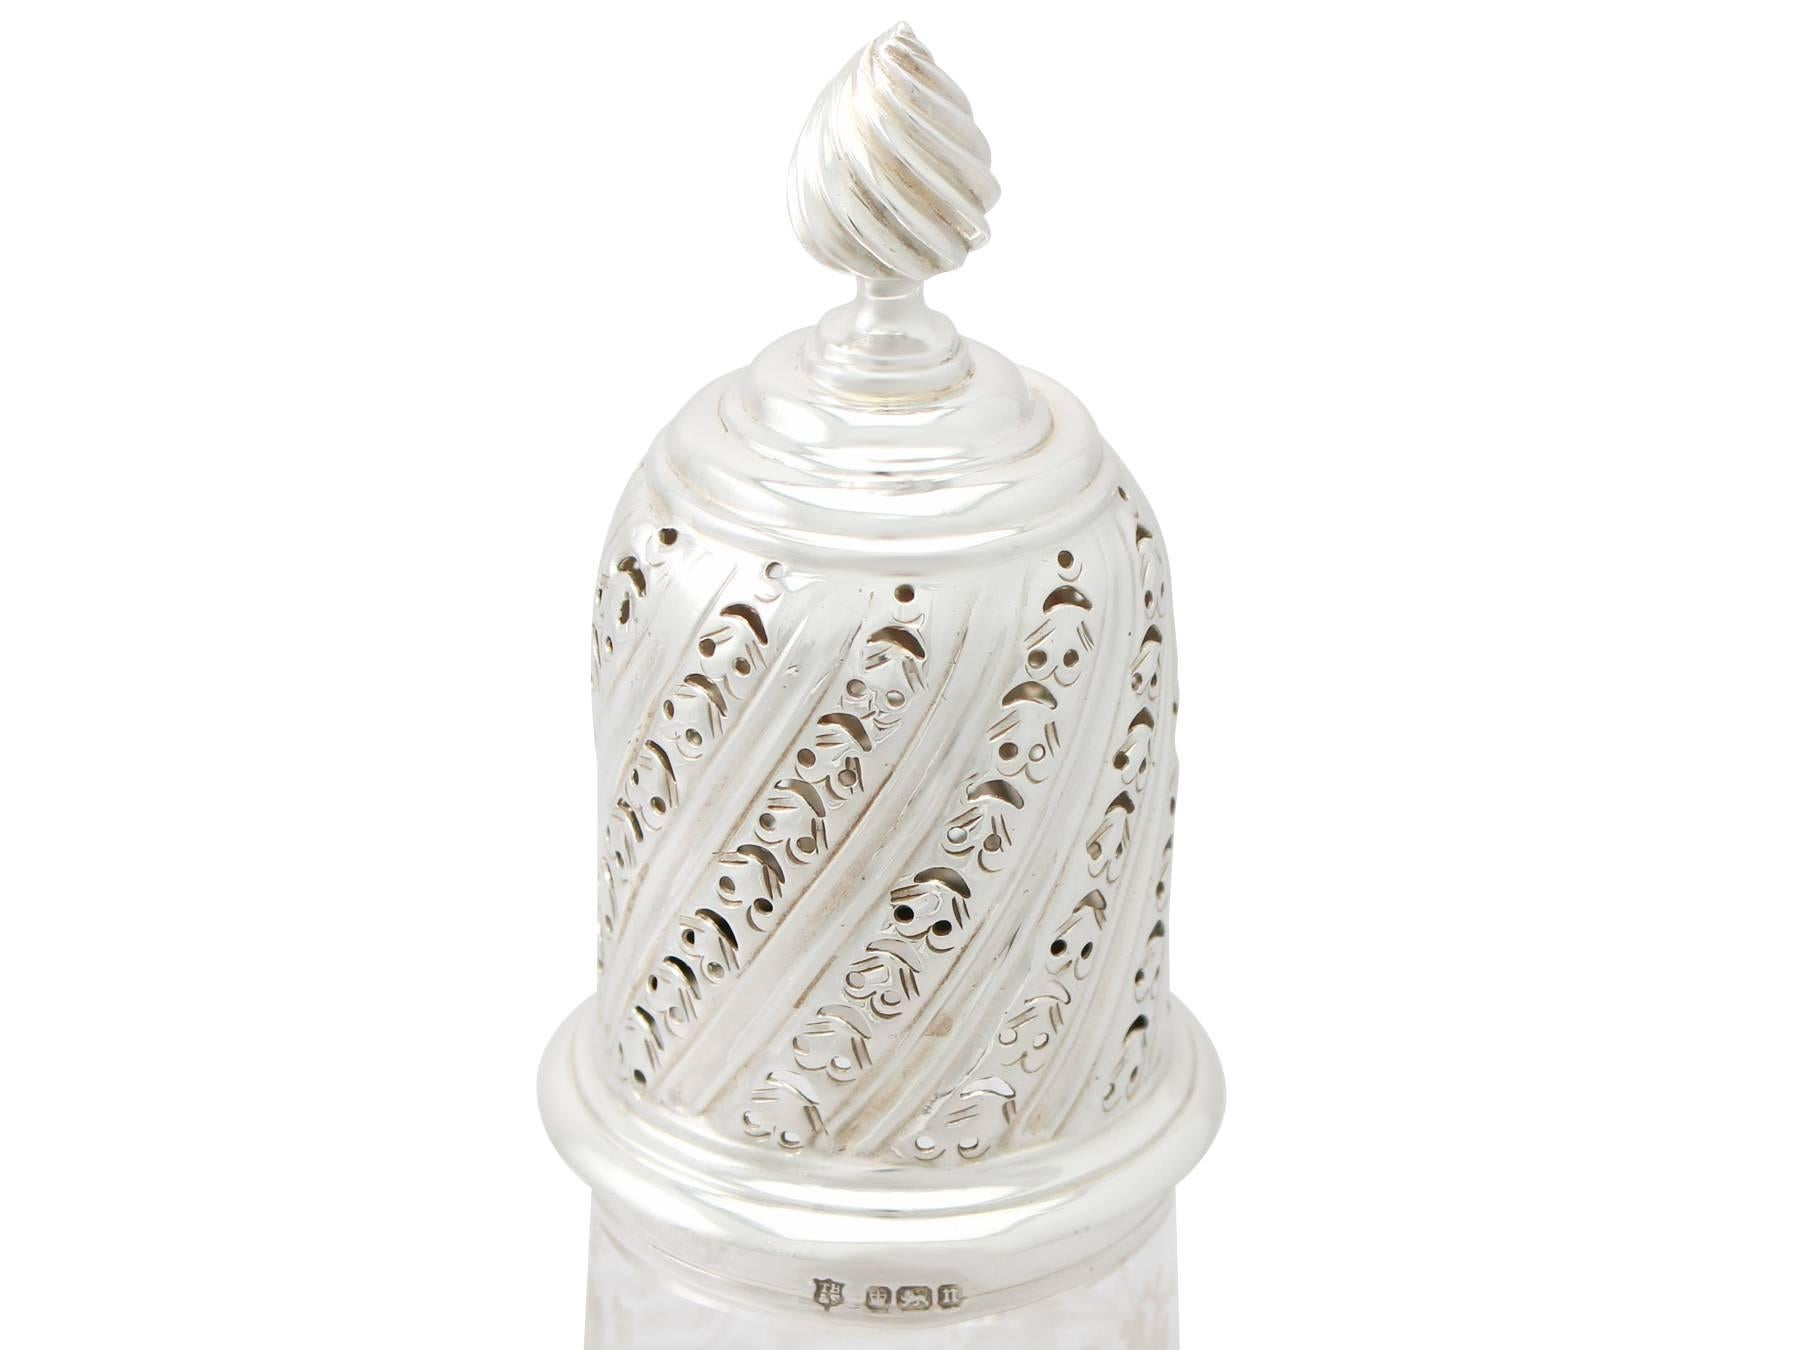 Antique Edwardian Acid Etched Glass and Sterling Silver Sugar Caster, 1905 In Excellent Condition For Sale In Jesmond, Newcastle Upon Tyne